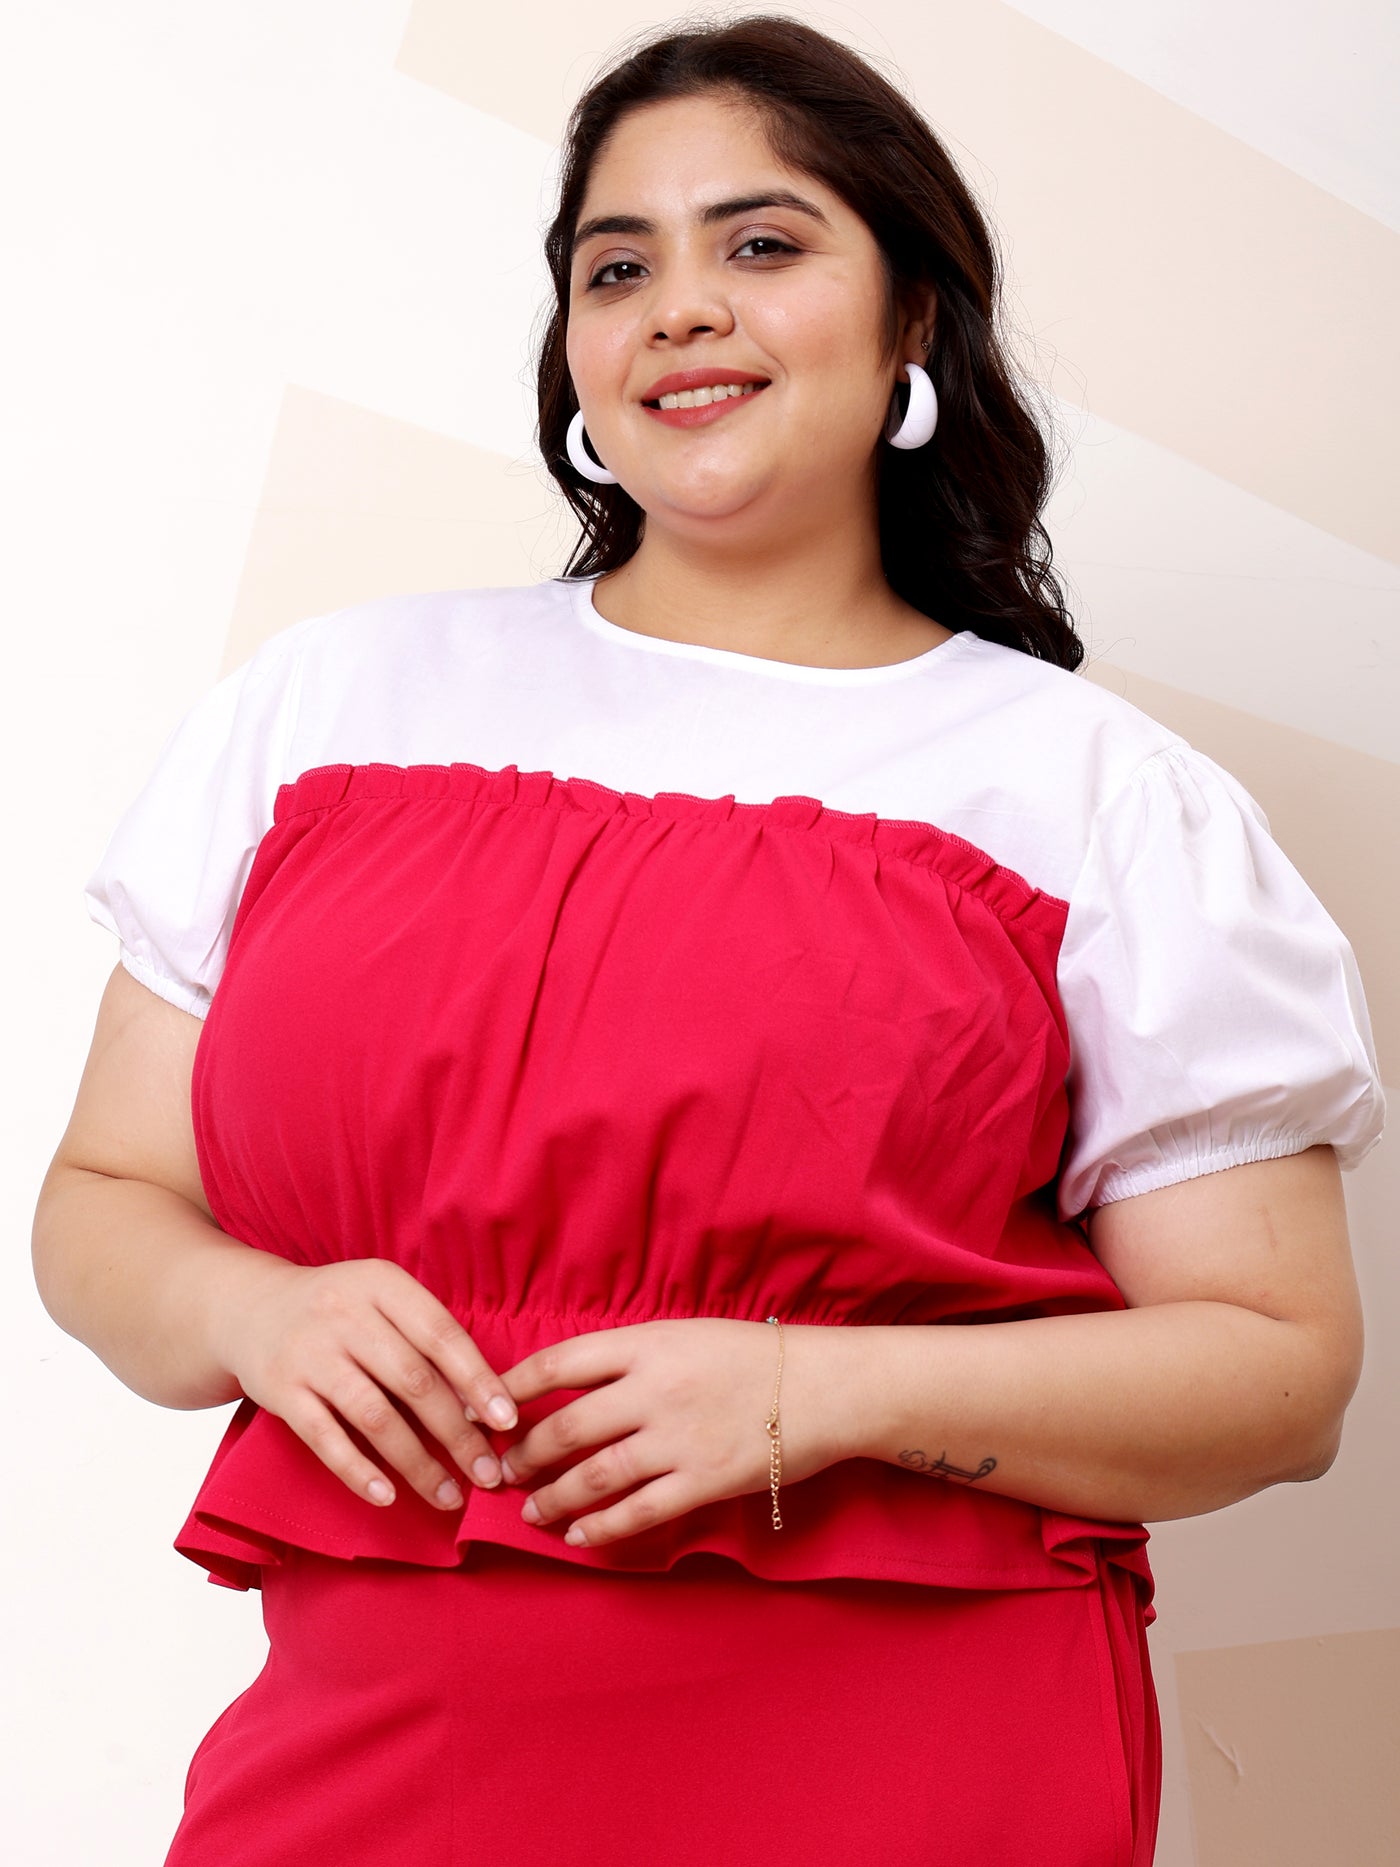 Athena Ample Plus Size Colourblocked Top With Trousers Co-Ords